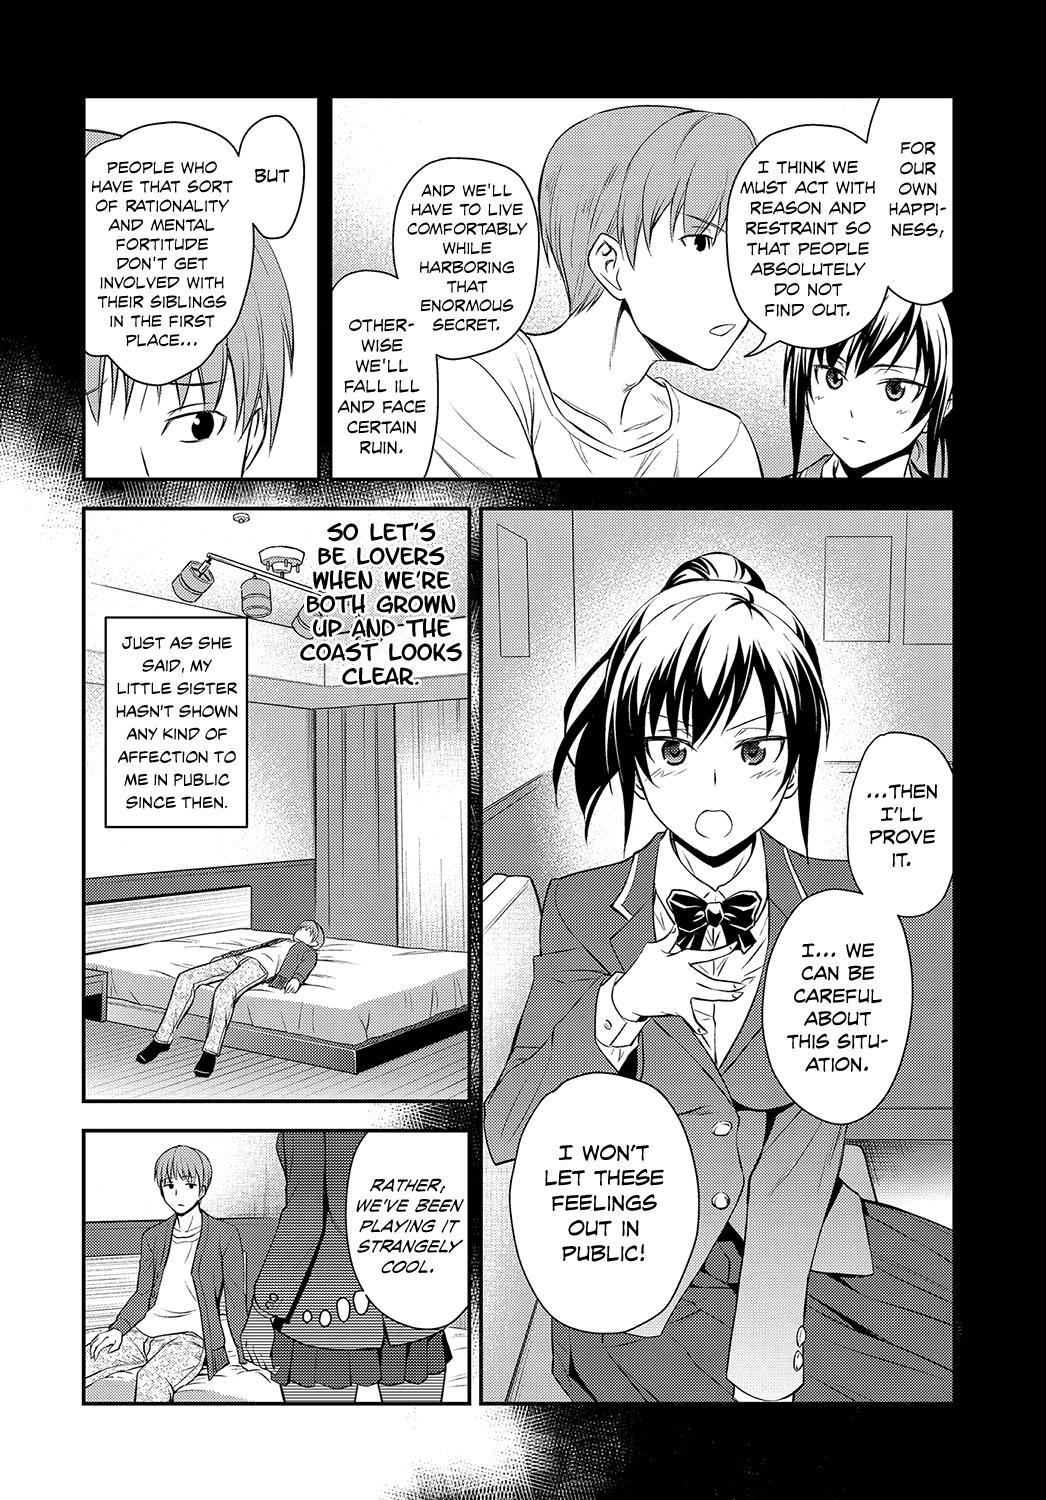 Tall Kyoudai no Himitsu no Su | The Siblings' Secret Nest First Time - Page 4